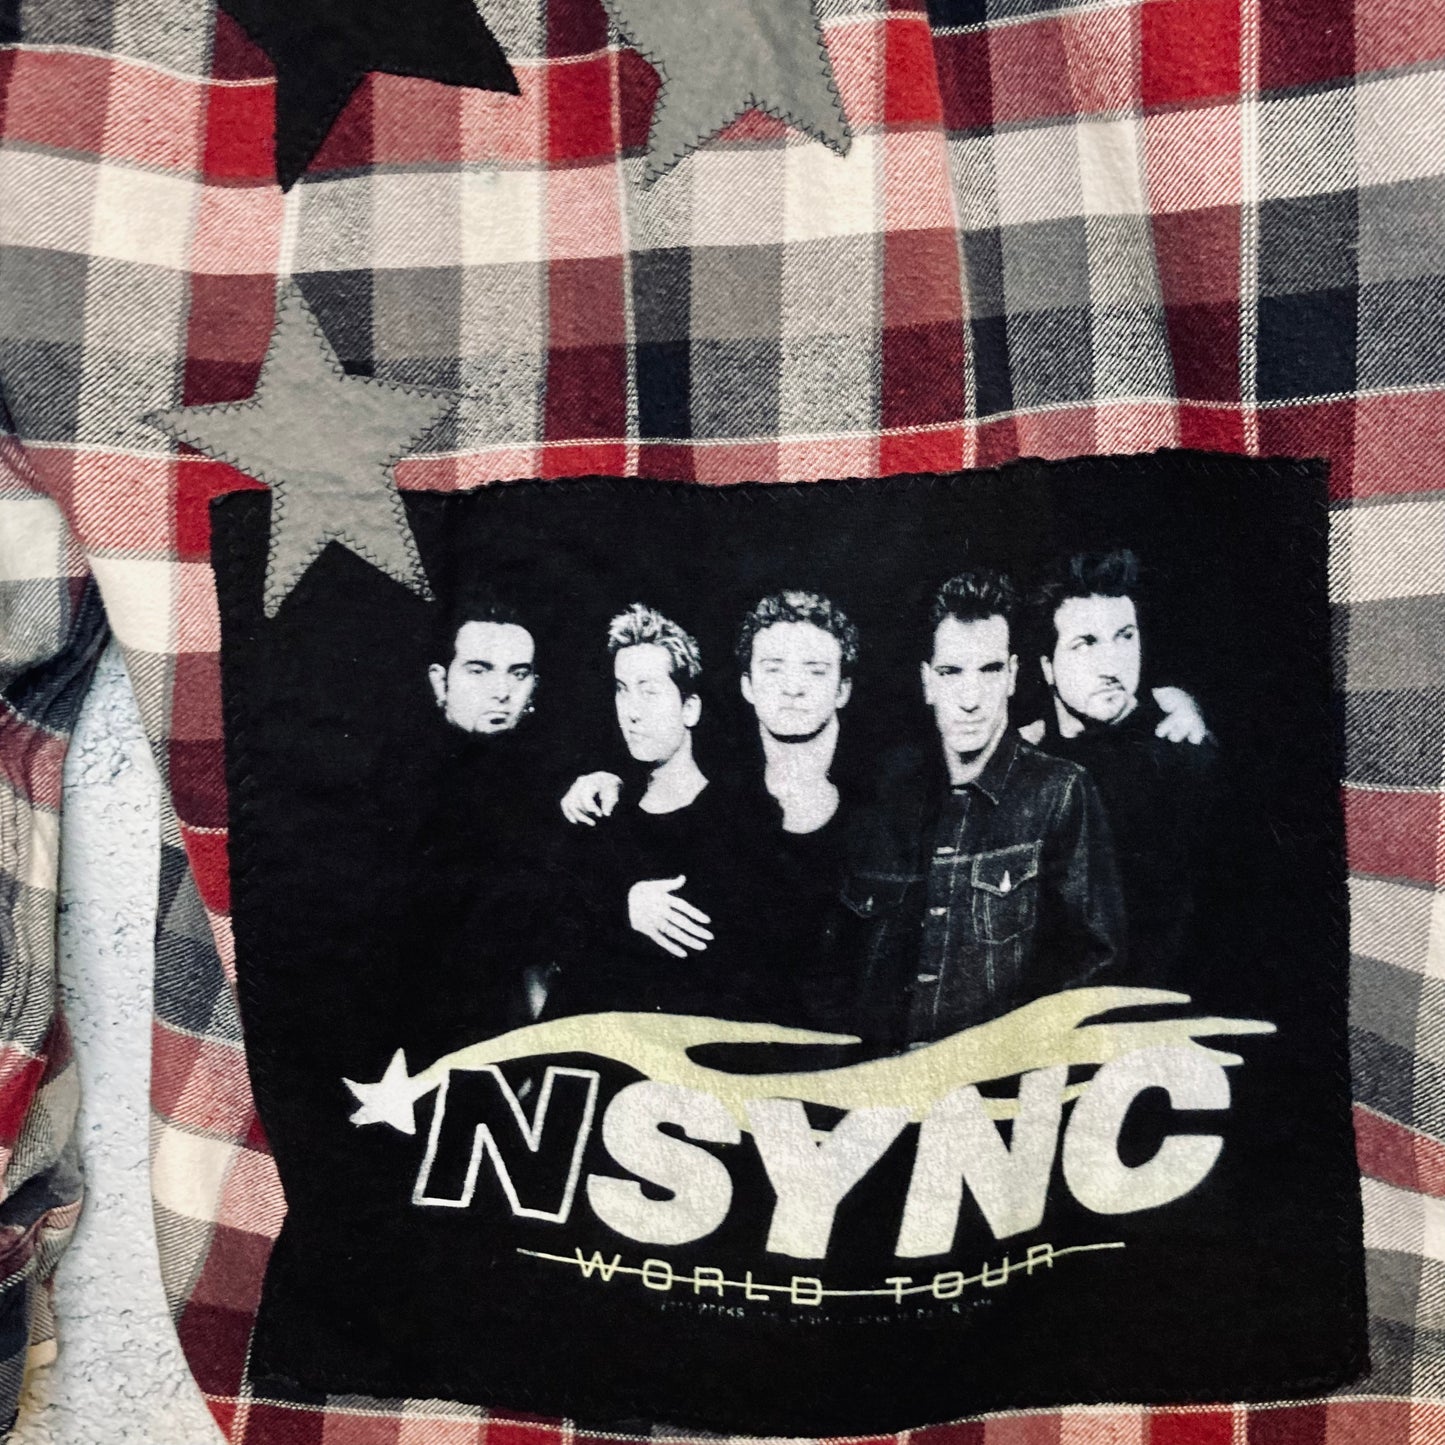 No Strings Band Flannel